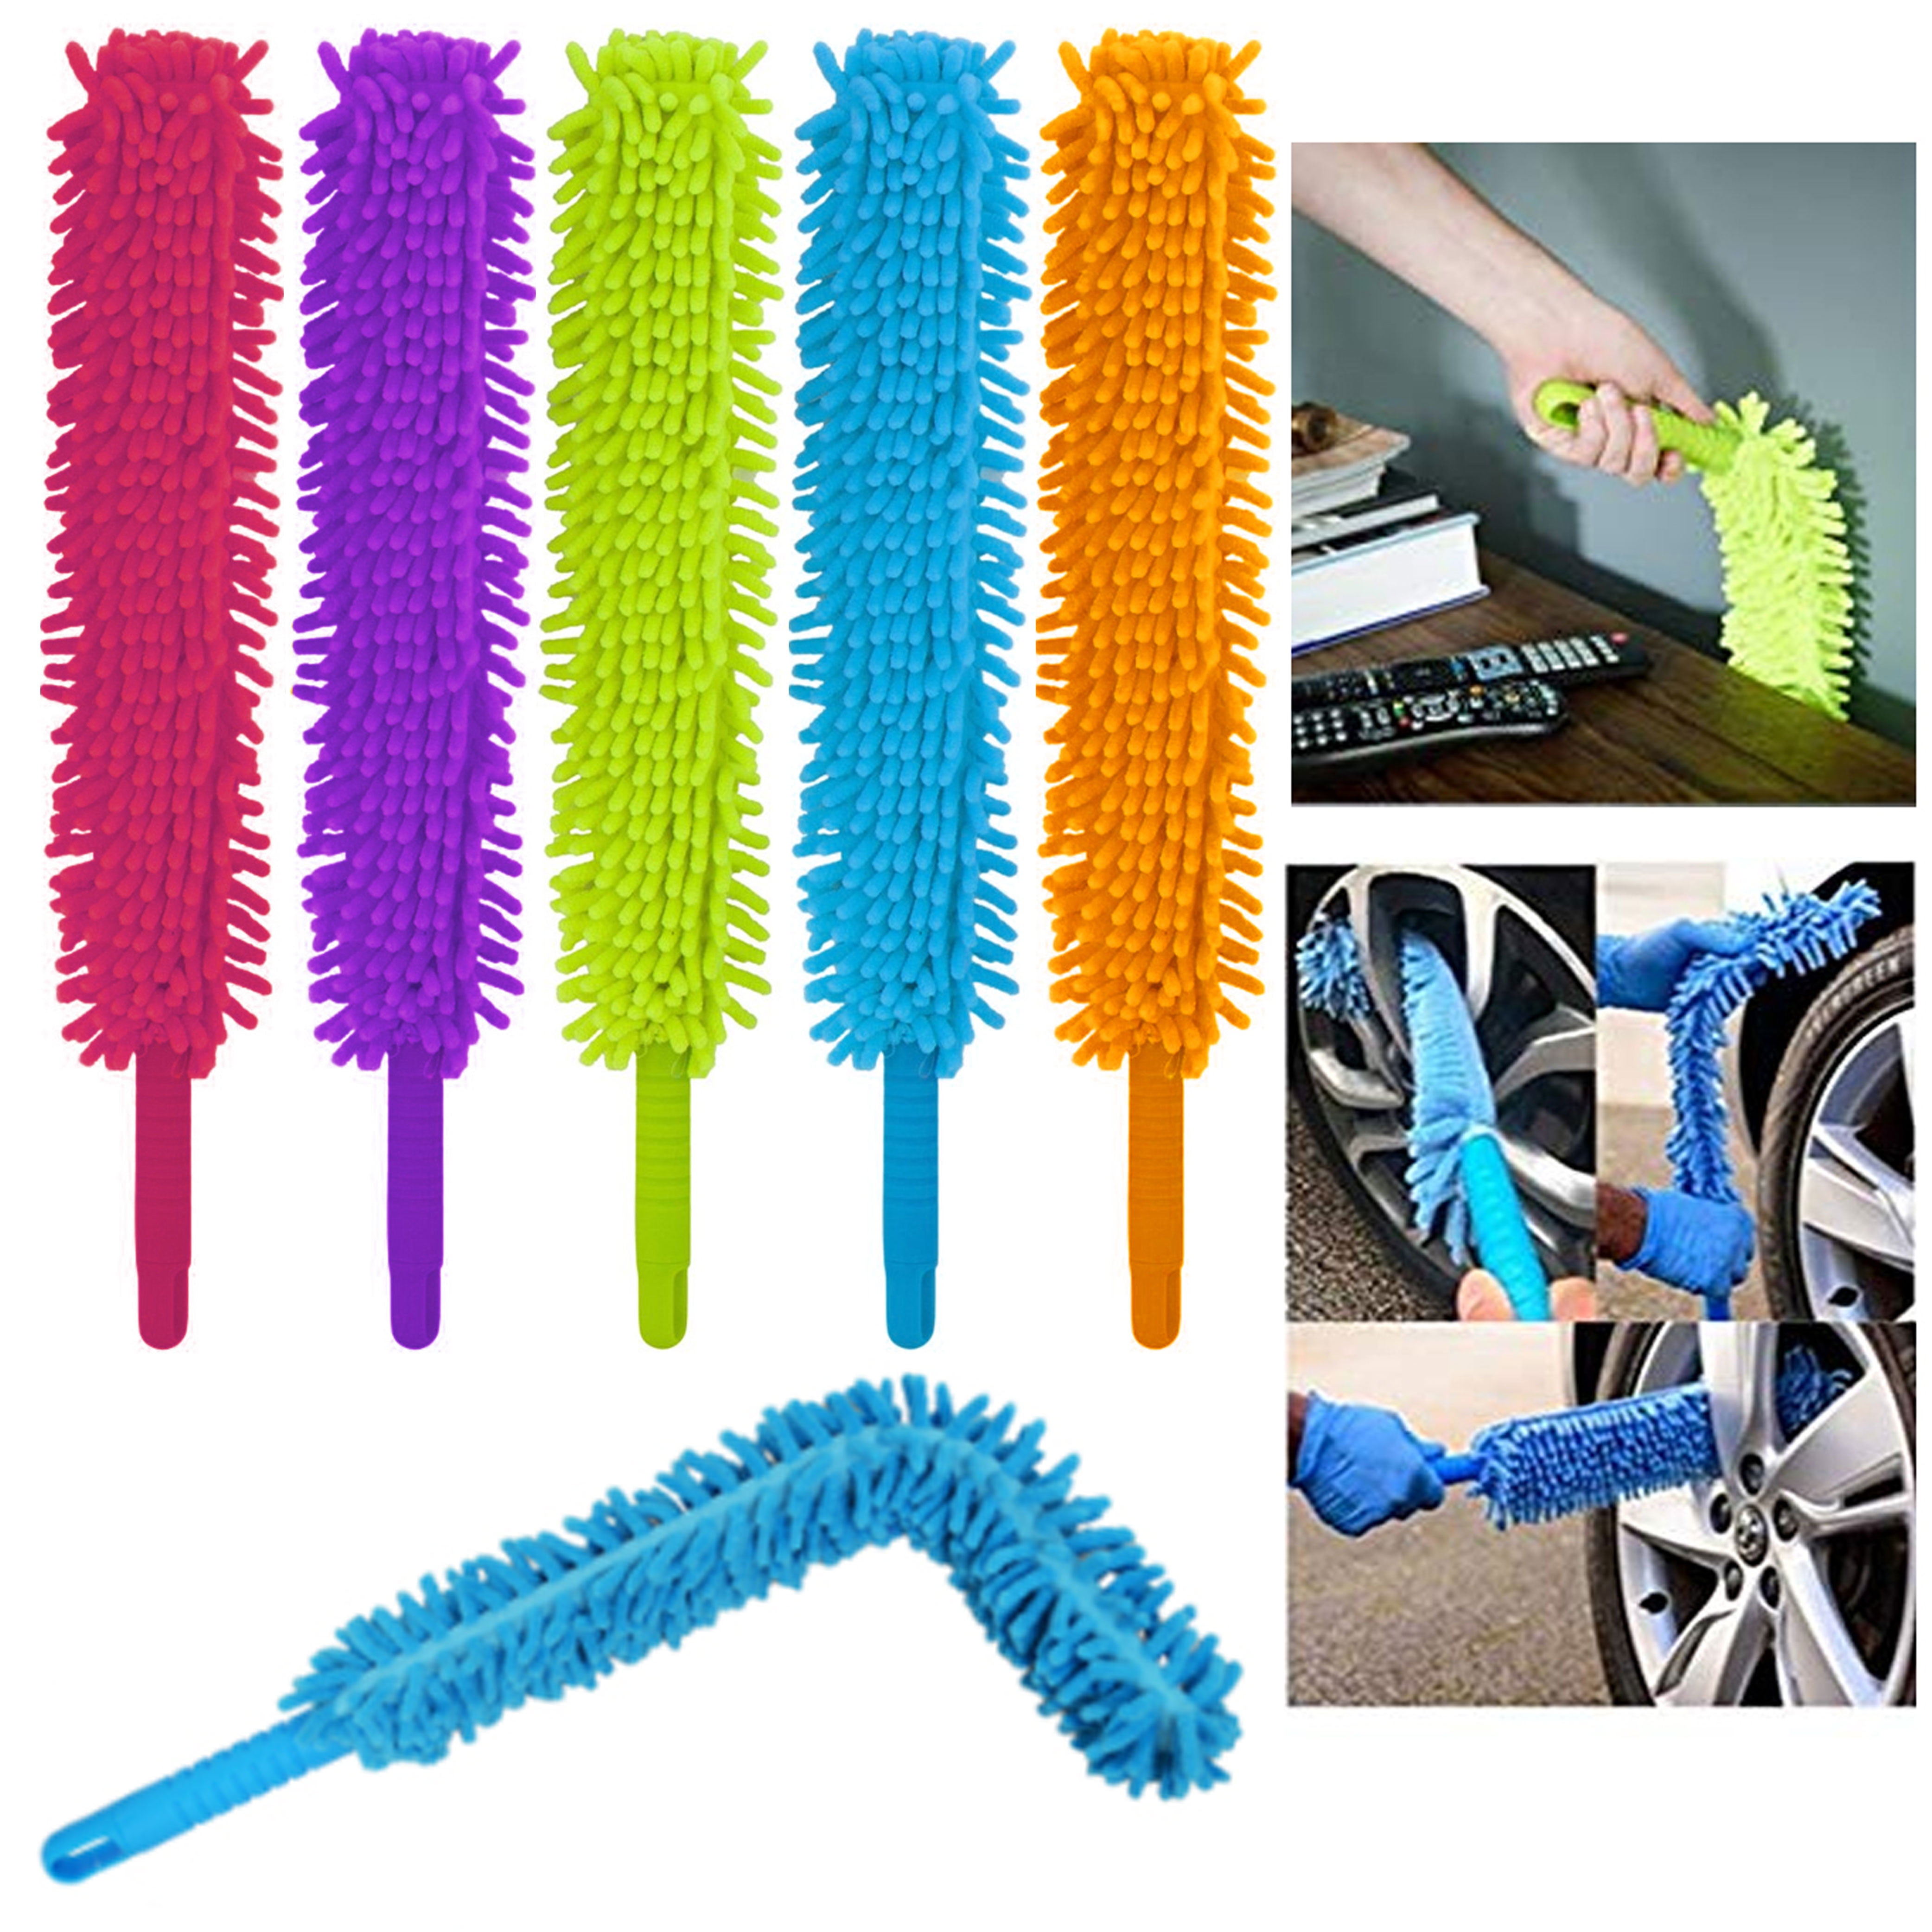 Washable Made in Turkey Details about   12 Inch Microfiber Desk Duster For Home/Office 